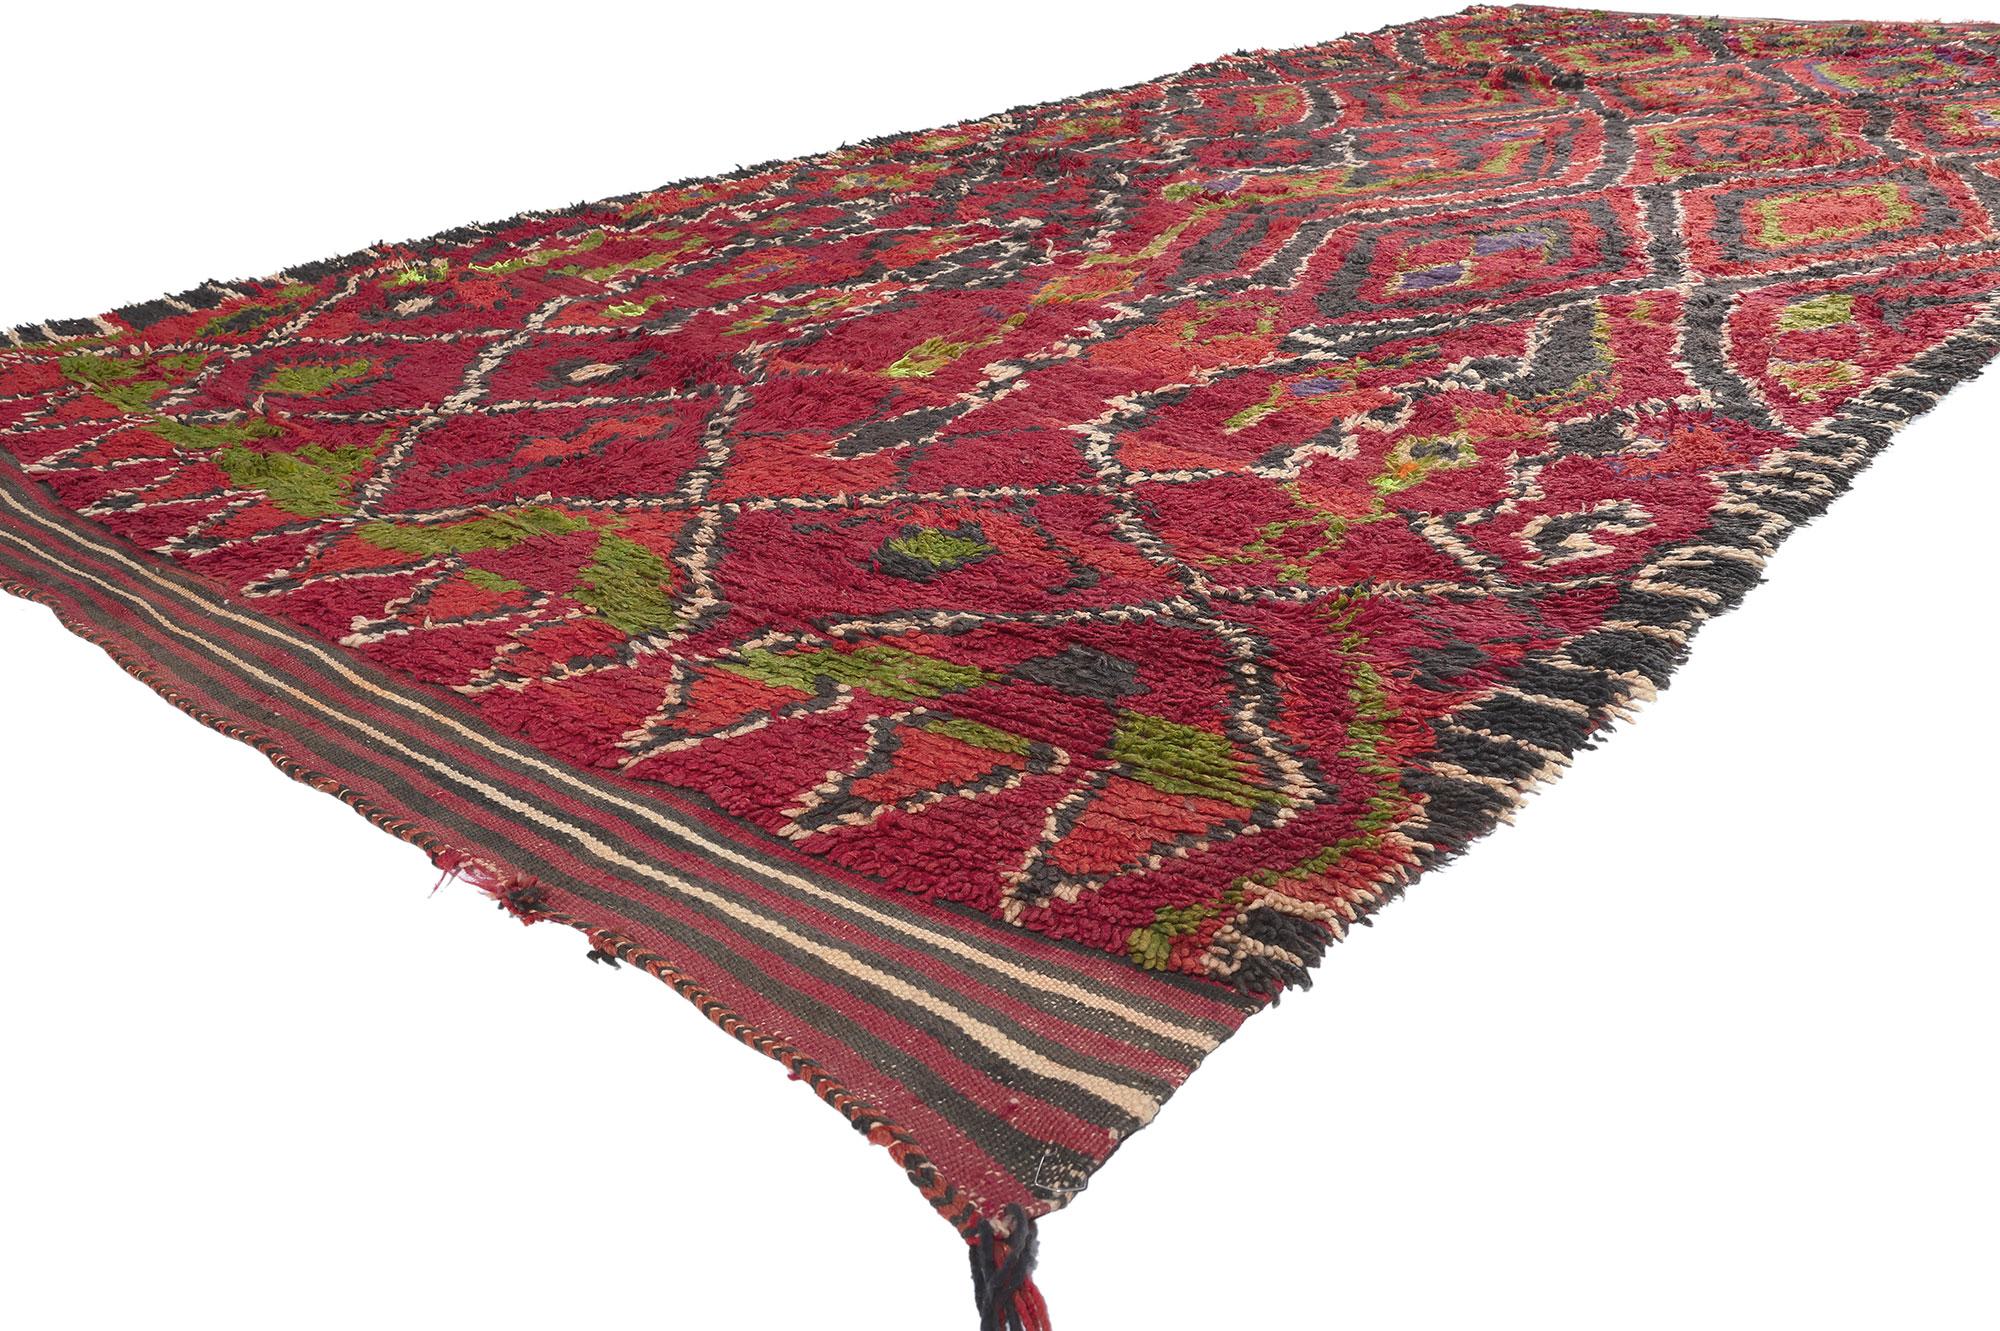 20647 Vintage Red Talsint Moroccan Rug, 06'00 x 14'05. Marvel at the enchanting artistry of this hand-knotted wool vintage Talsint Moroccan rug, originating from the Figuig region in northeast Morocco, also known as Aït Bou Ichaouen. Witness a